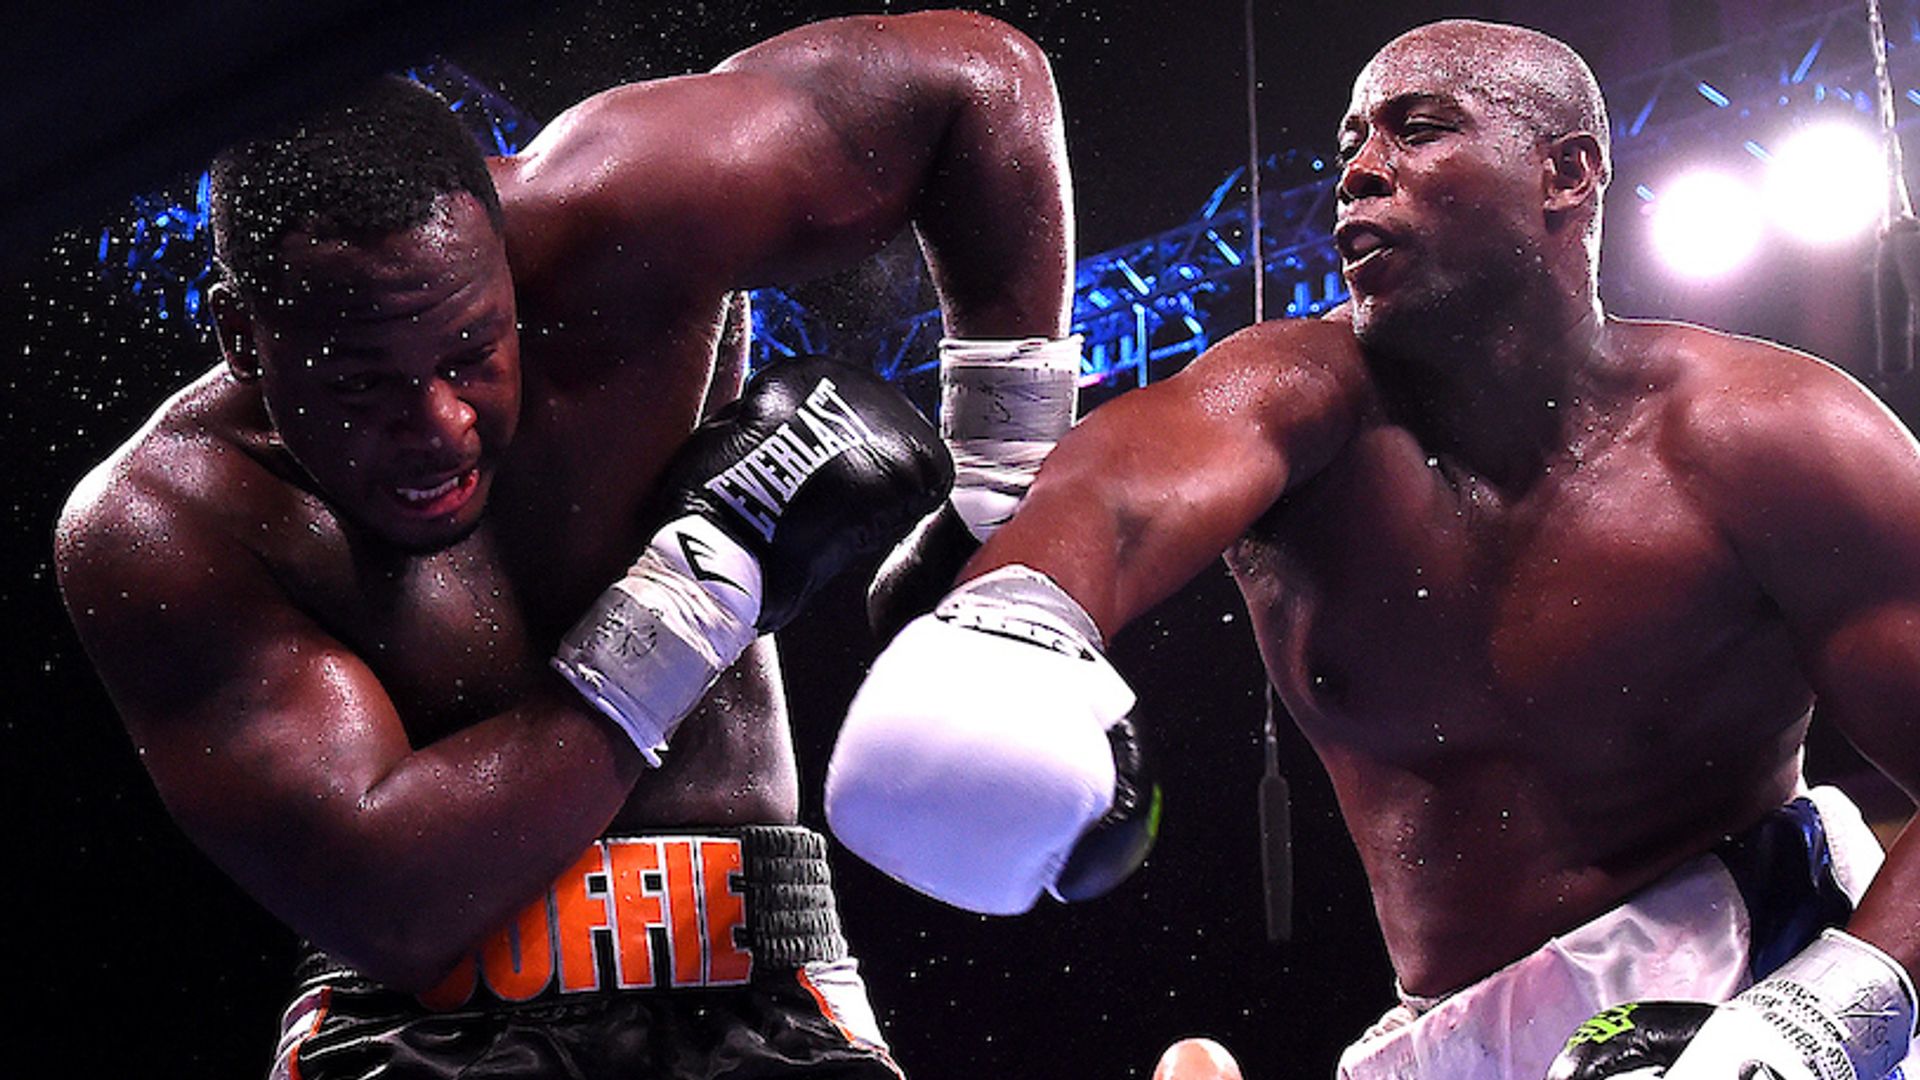 US heavyweight hope loses his unbeaten record